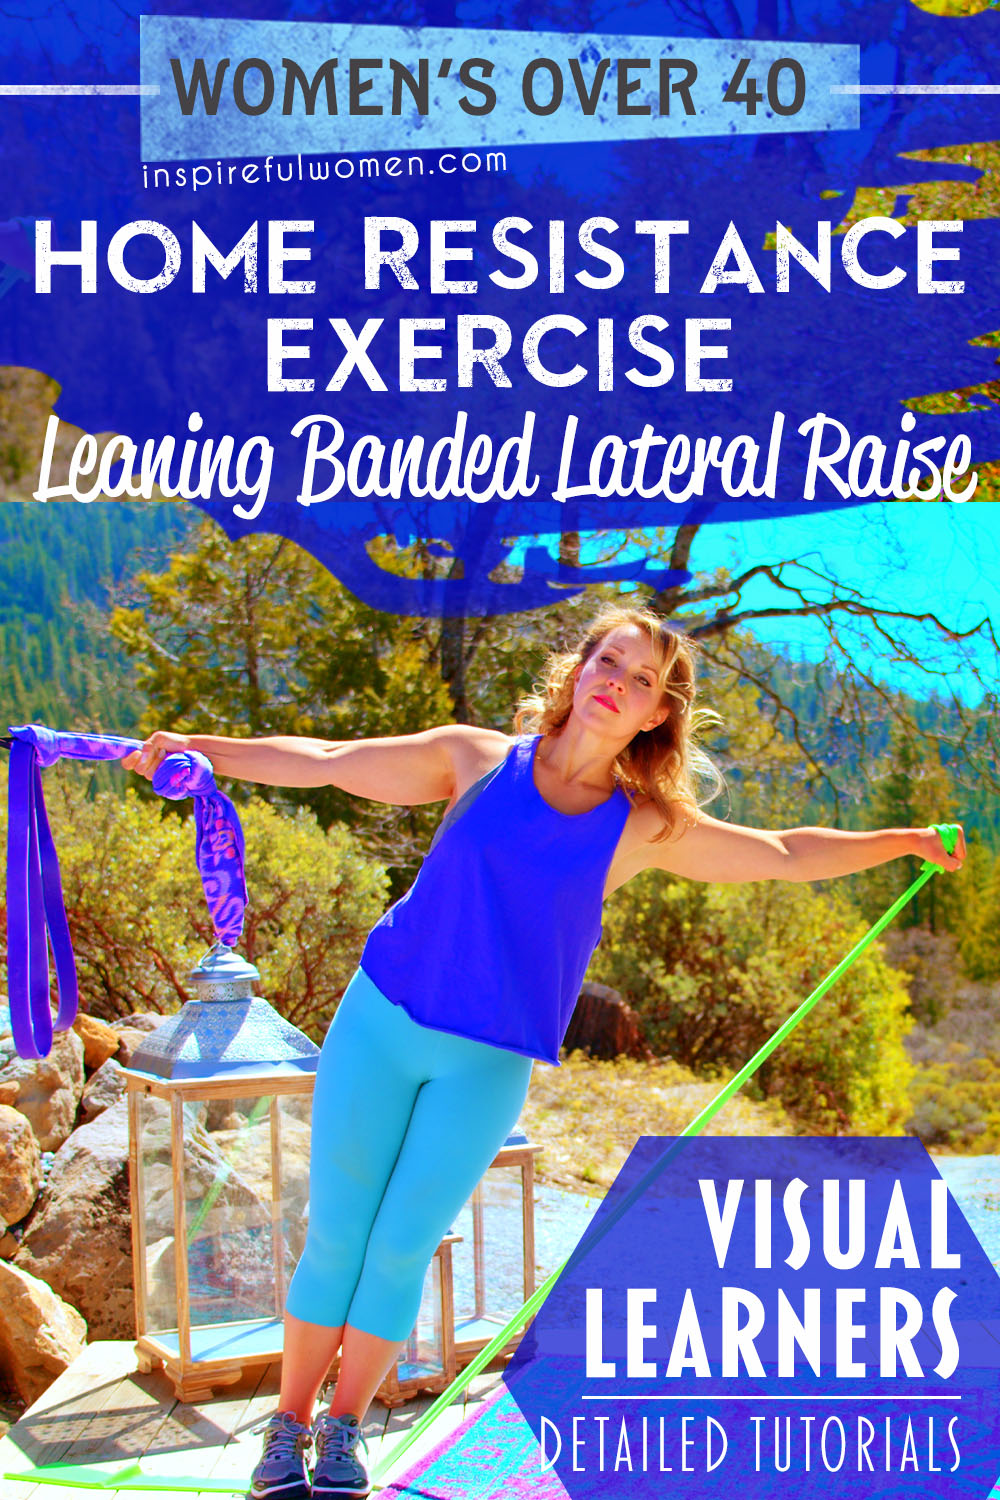 leaning-banded-lateral-deltoid-raise-home-resistance-exercise-women-over-40